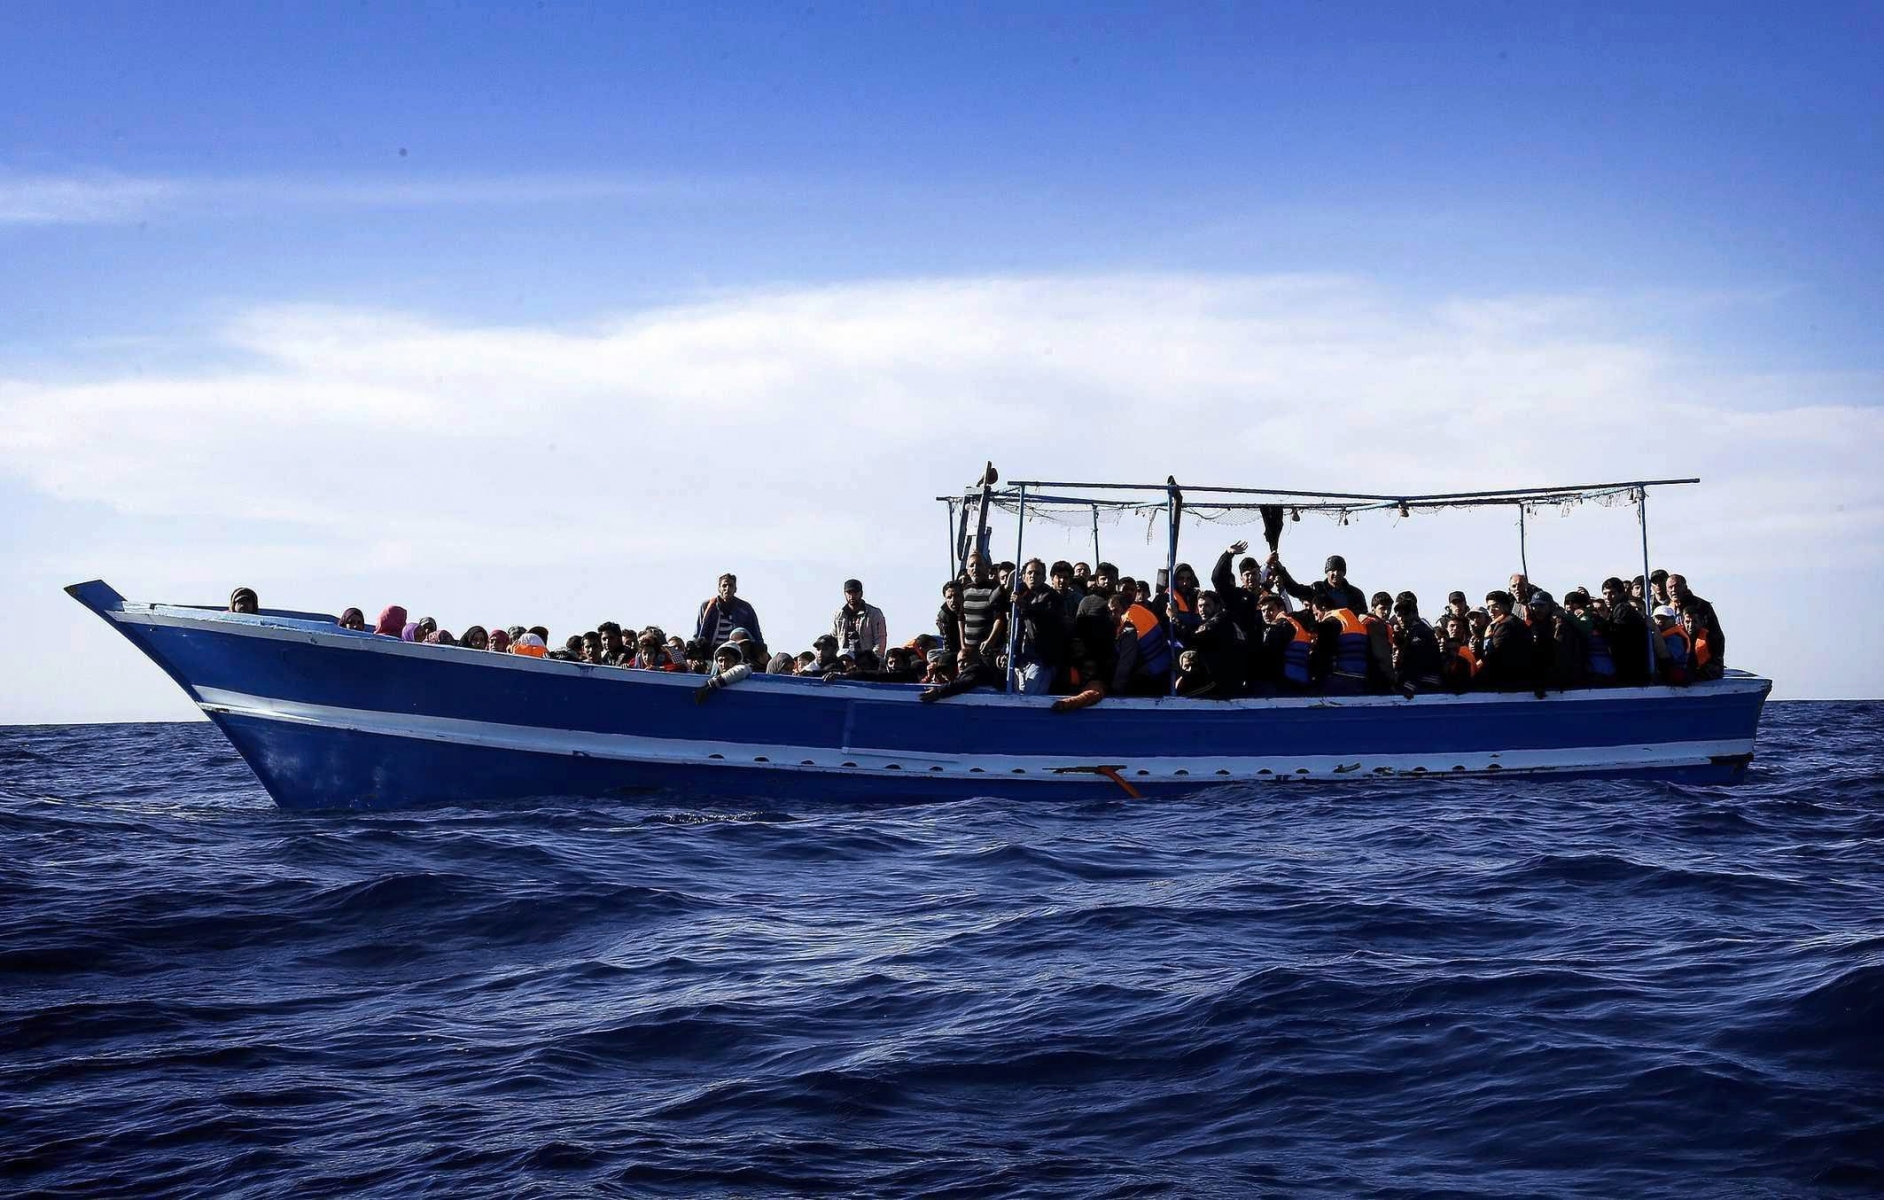 JAHRESRUECKBLICK 2014 ñ APRIL ñ ZUM JAHRESRUECKBLICK 2014 FINDEN SIE WEITERE BILDER UND THEMEN AUF DEM NEWS-PORTAL VON KEYSTONE - People on a boat carrying 267 migrants, including men, women and children, are pictured off the coast of Libya in the southern Mediterranean Sea, during the 'Mare Nostrum' operation by crew members of the Frigate 'Espero', 28 April 2014. According to recent reports, since 01 January, sea patrols have rescued about 22,000 migrants.  EPA/GIUSEPPE LAMI JAHRESRUECKBLICK 2014 ñ APRIL ñ ITALIEN MIGRATION FLUECHTLIN